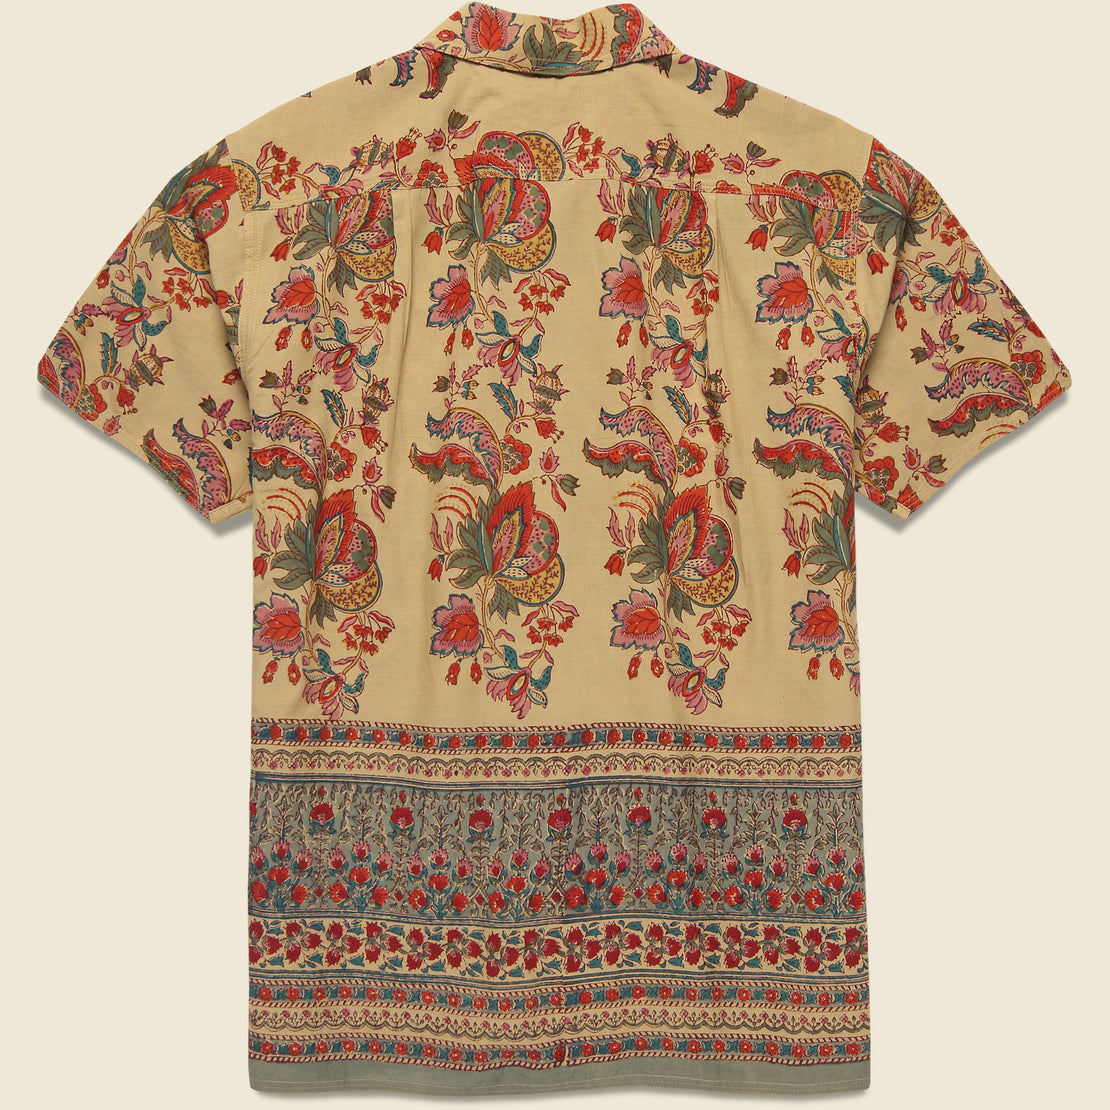 Chintan Floral Border Block Print Shirt - Beige/Red/Multi - Kardo - STAG Provisions - Tops - S/S Woven - Floral